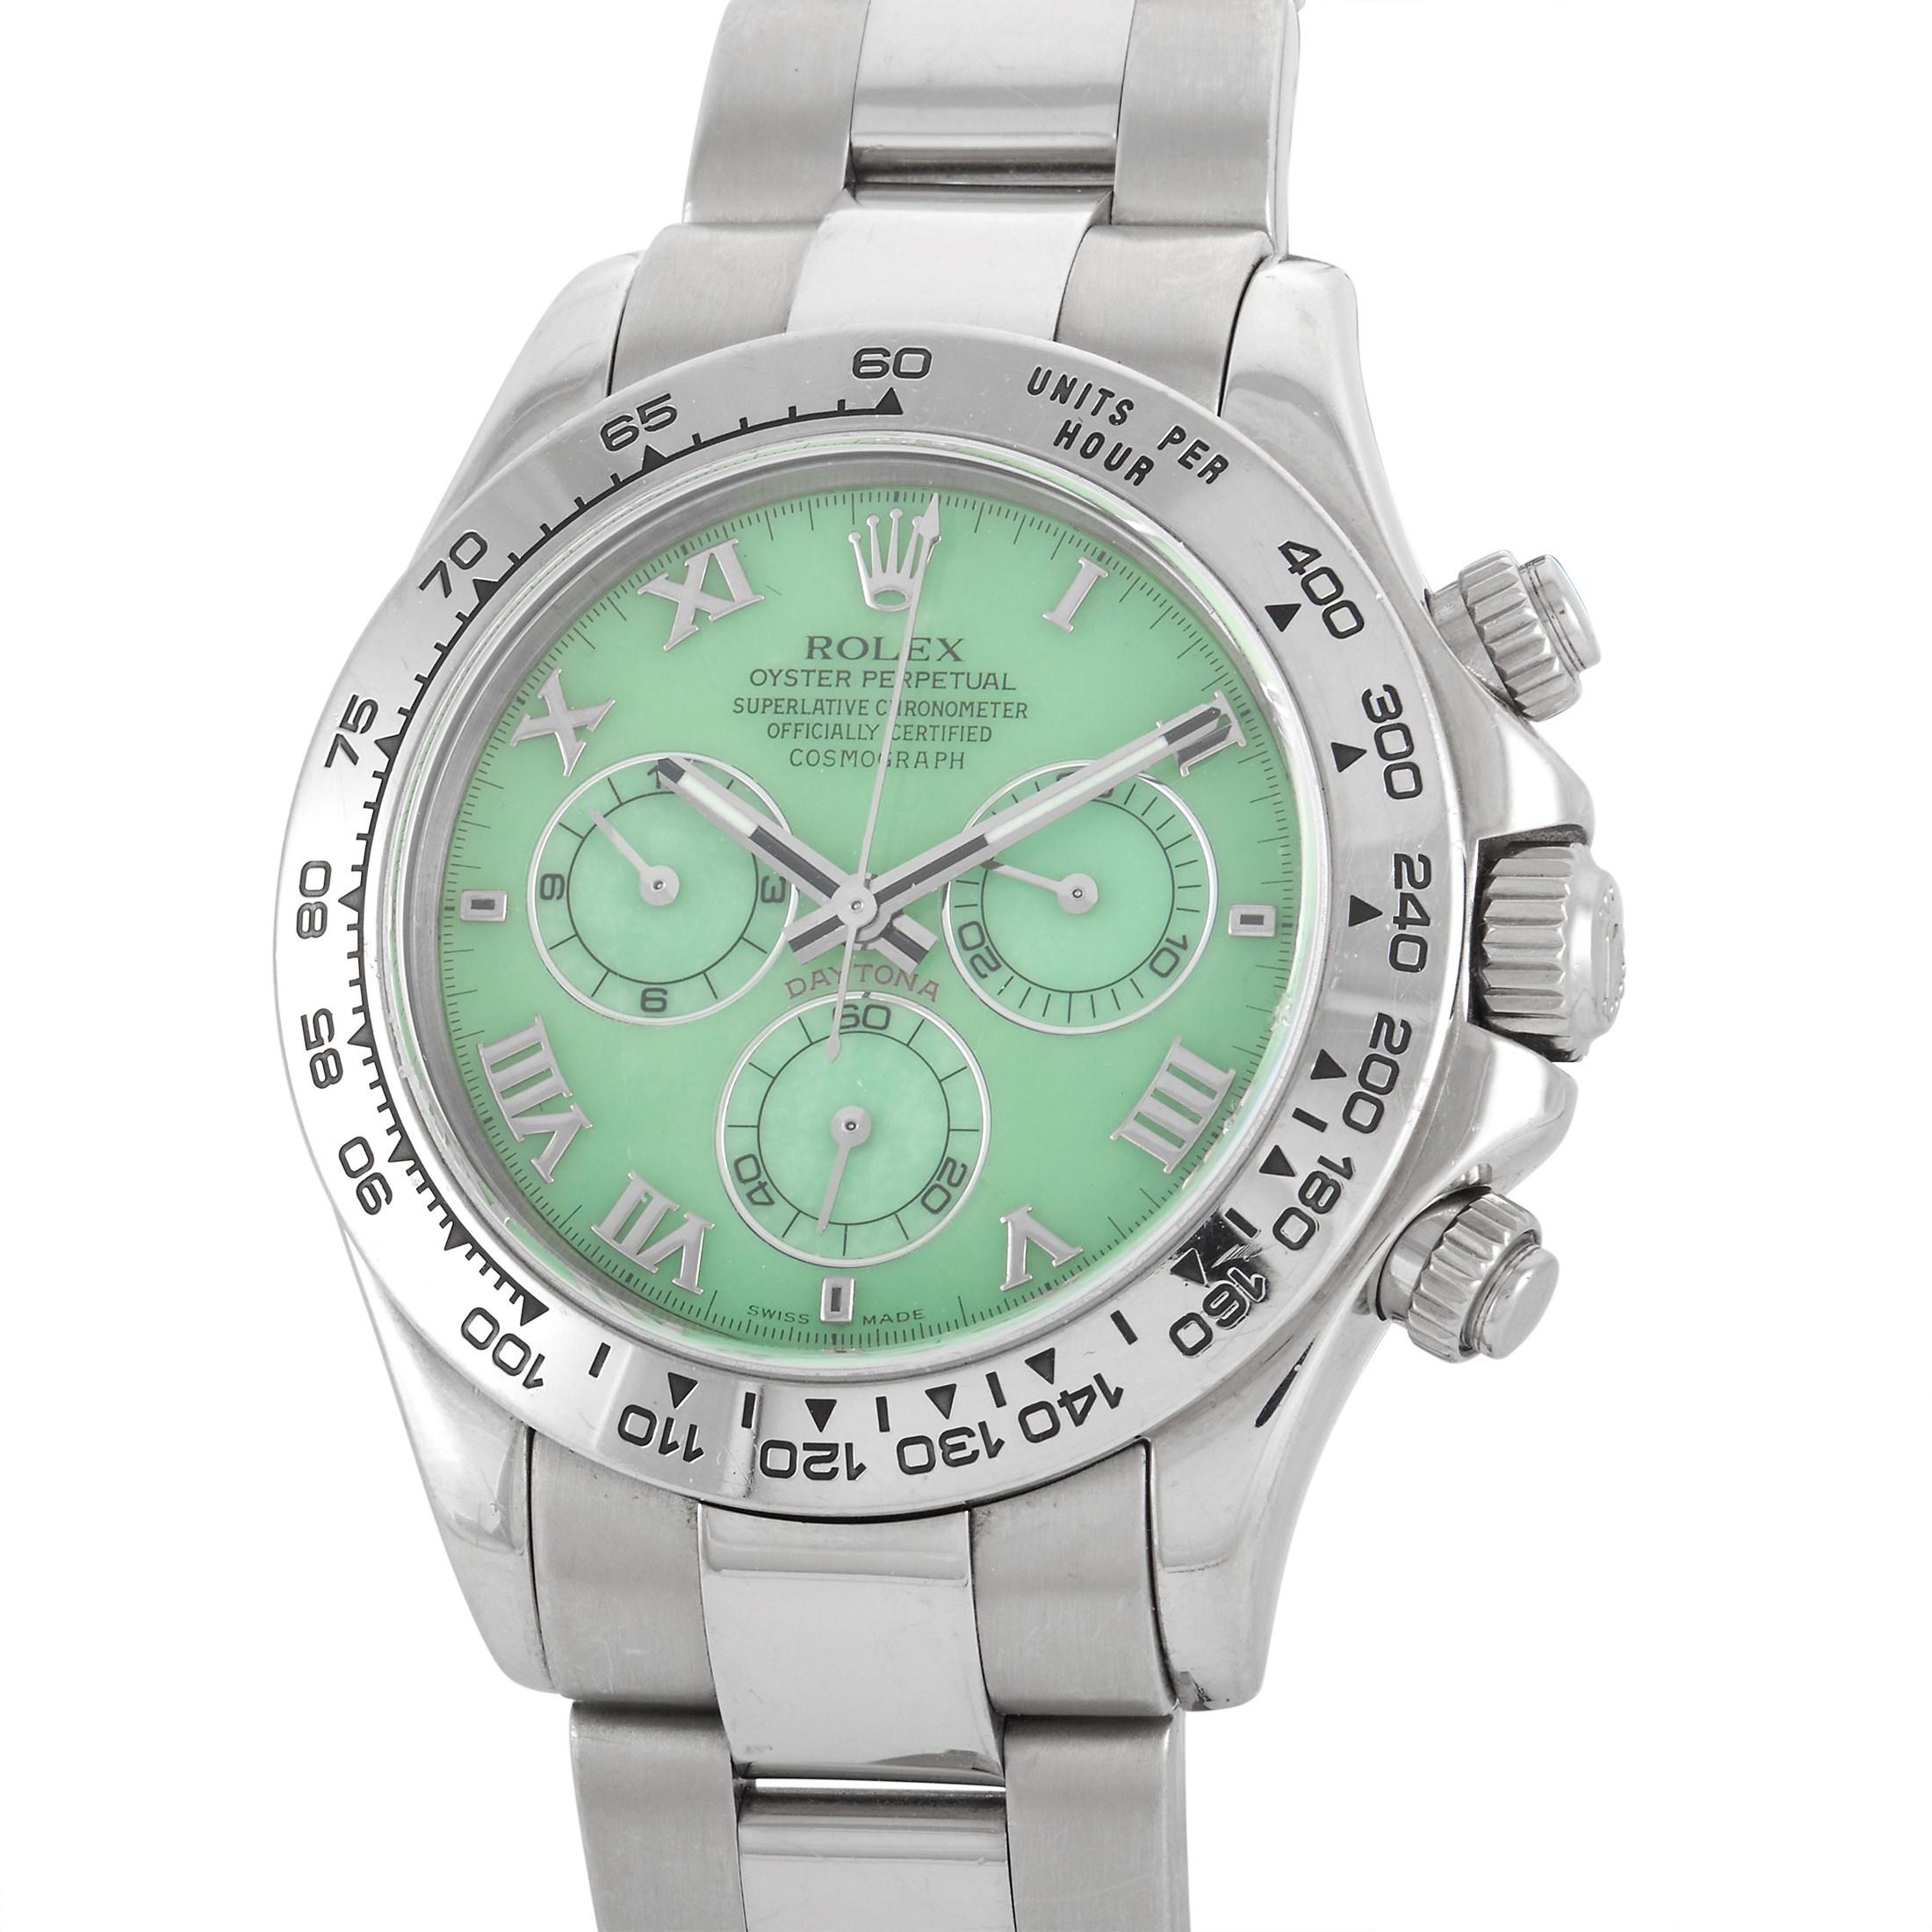 The Rolex Daytona Green Chalcedony Beach Watch, reference number 116509, is a rare iteration of one of the brand’s most impeccable designs.

This striking watch begins with a 40mm case and bracelet made from 18K white gold. The beauty of this piece